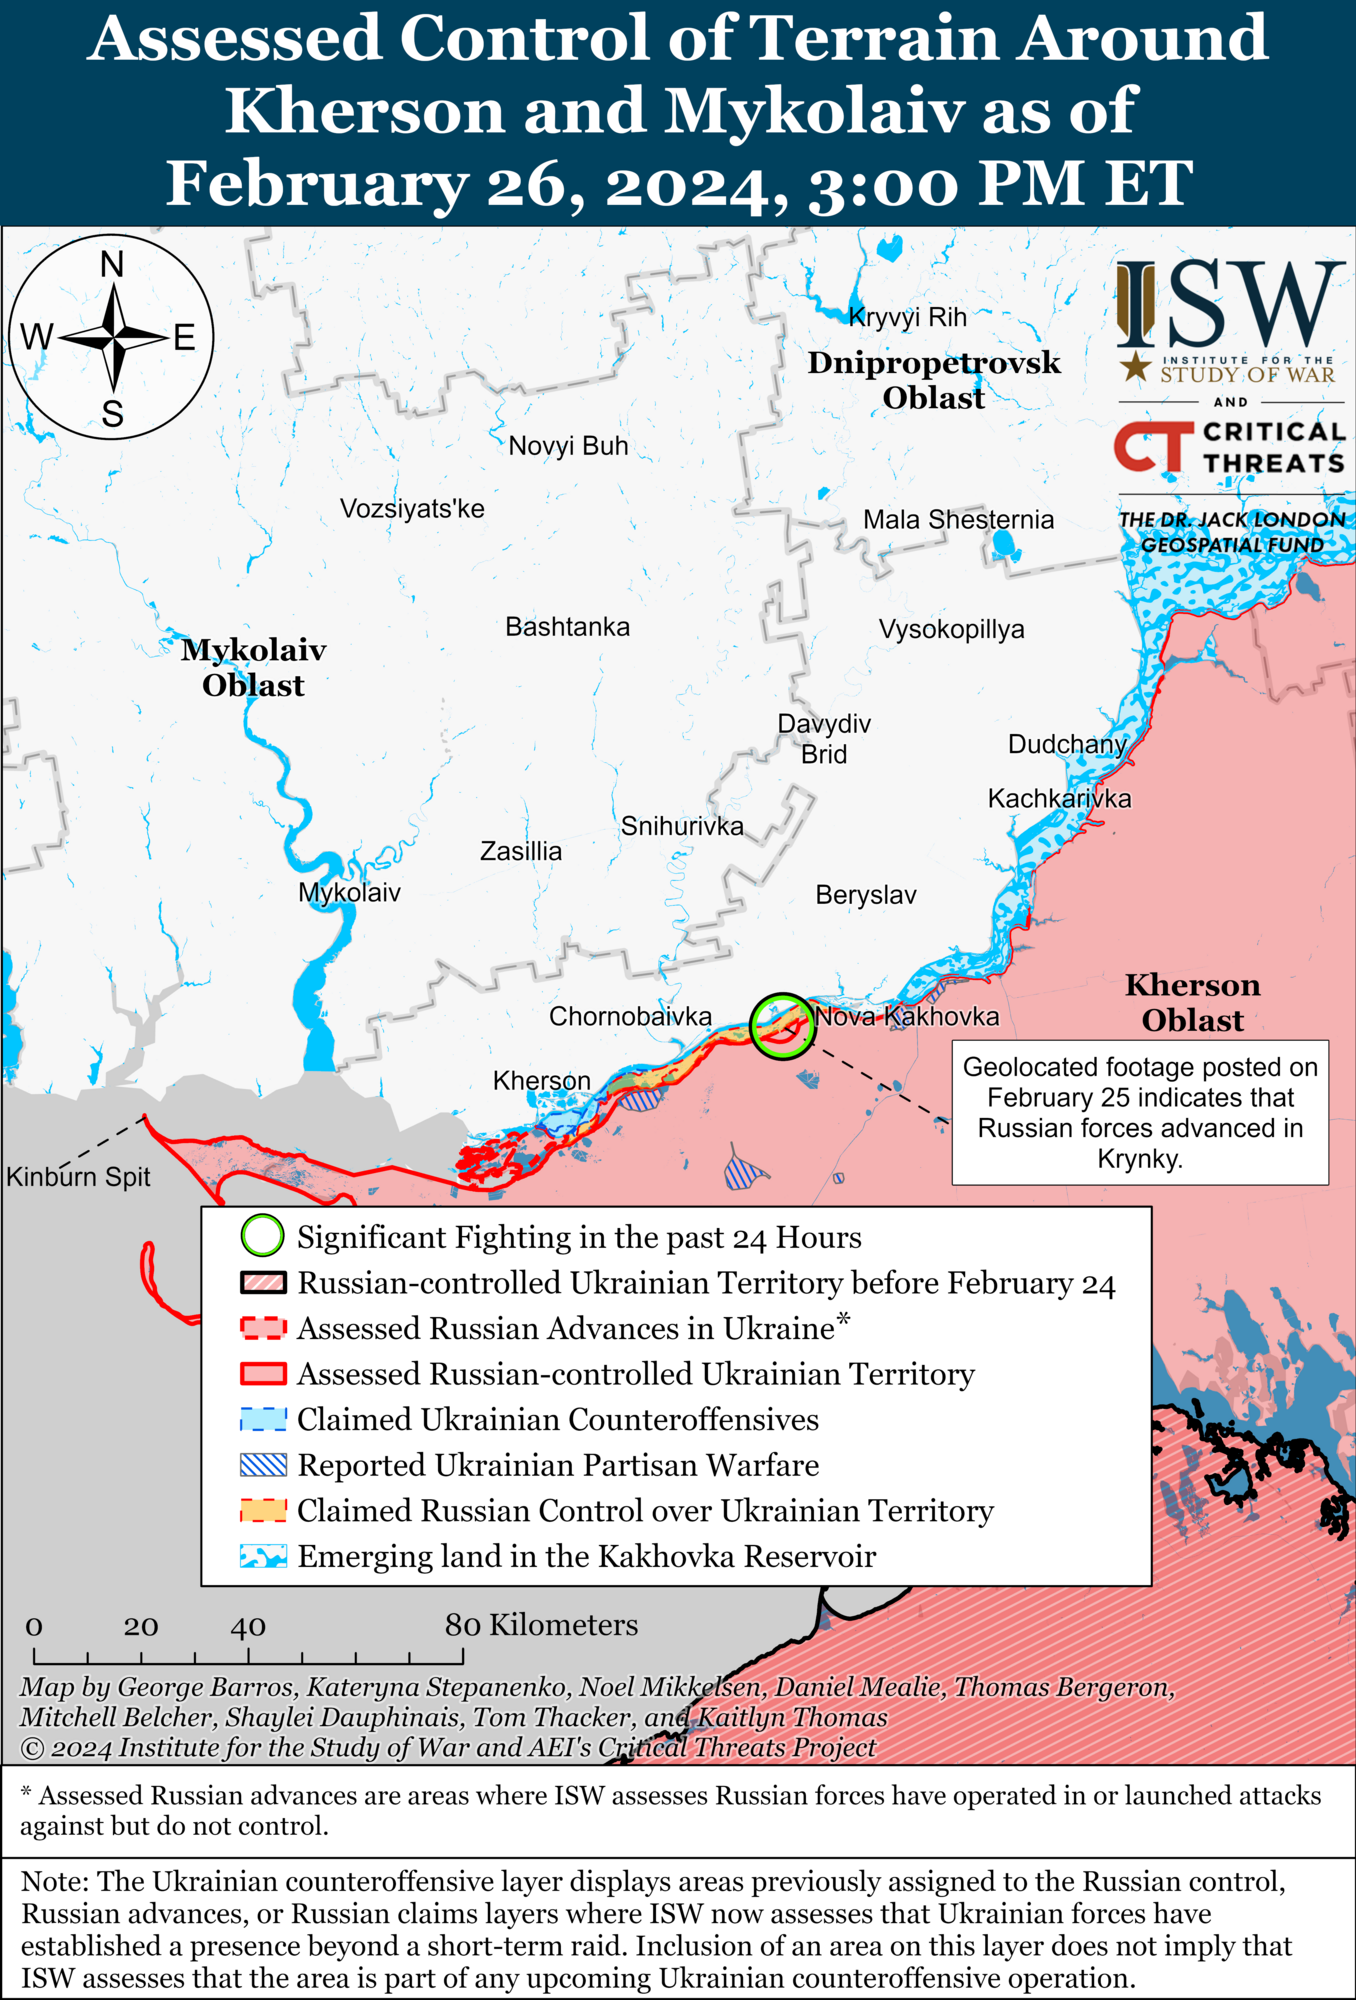 Russia is preparing a new offensive in Ukraine, but the Ukrainian Armed Forces can challenge the Russian initiative under one condition - ISW